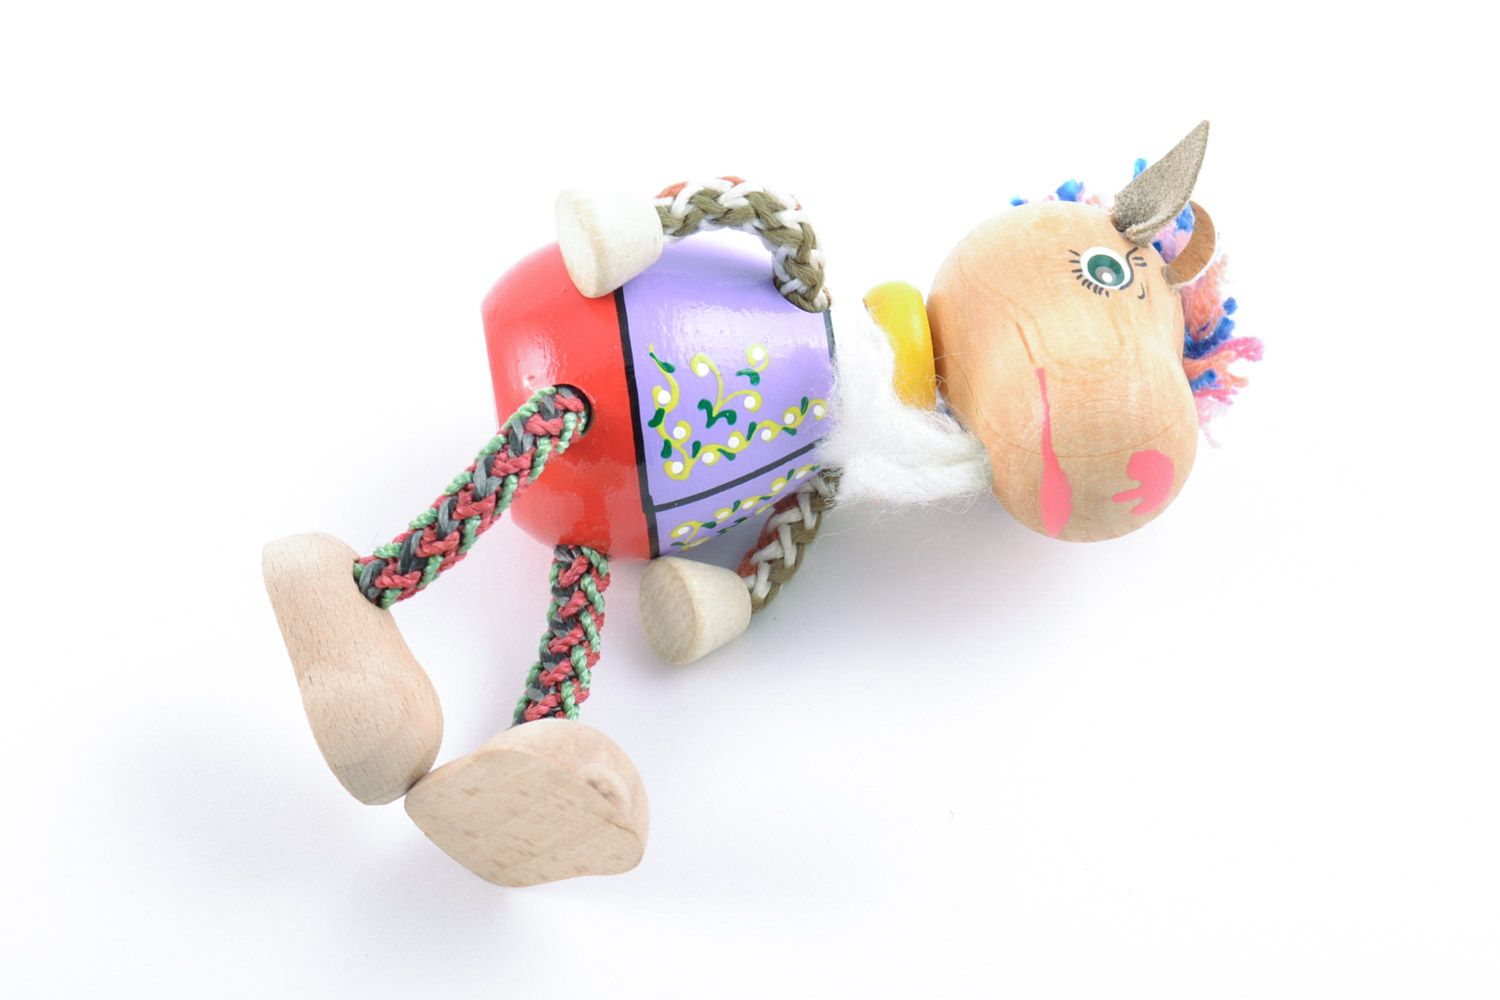 Cute painted with eco dyes wooden toy goat handmade for children and interior photo 5